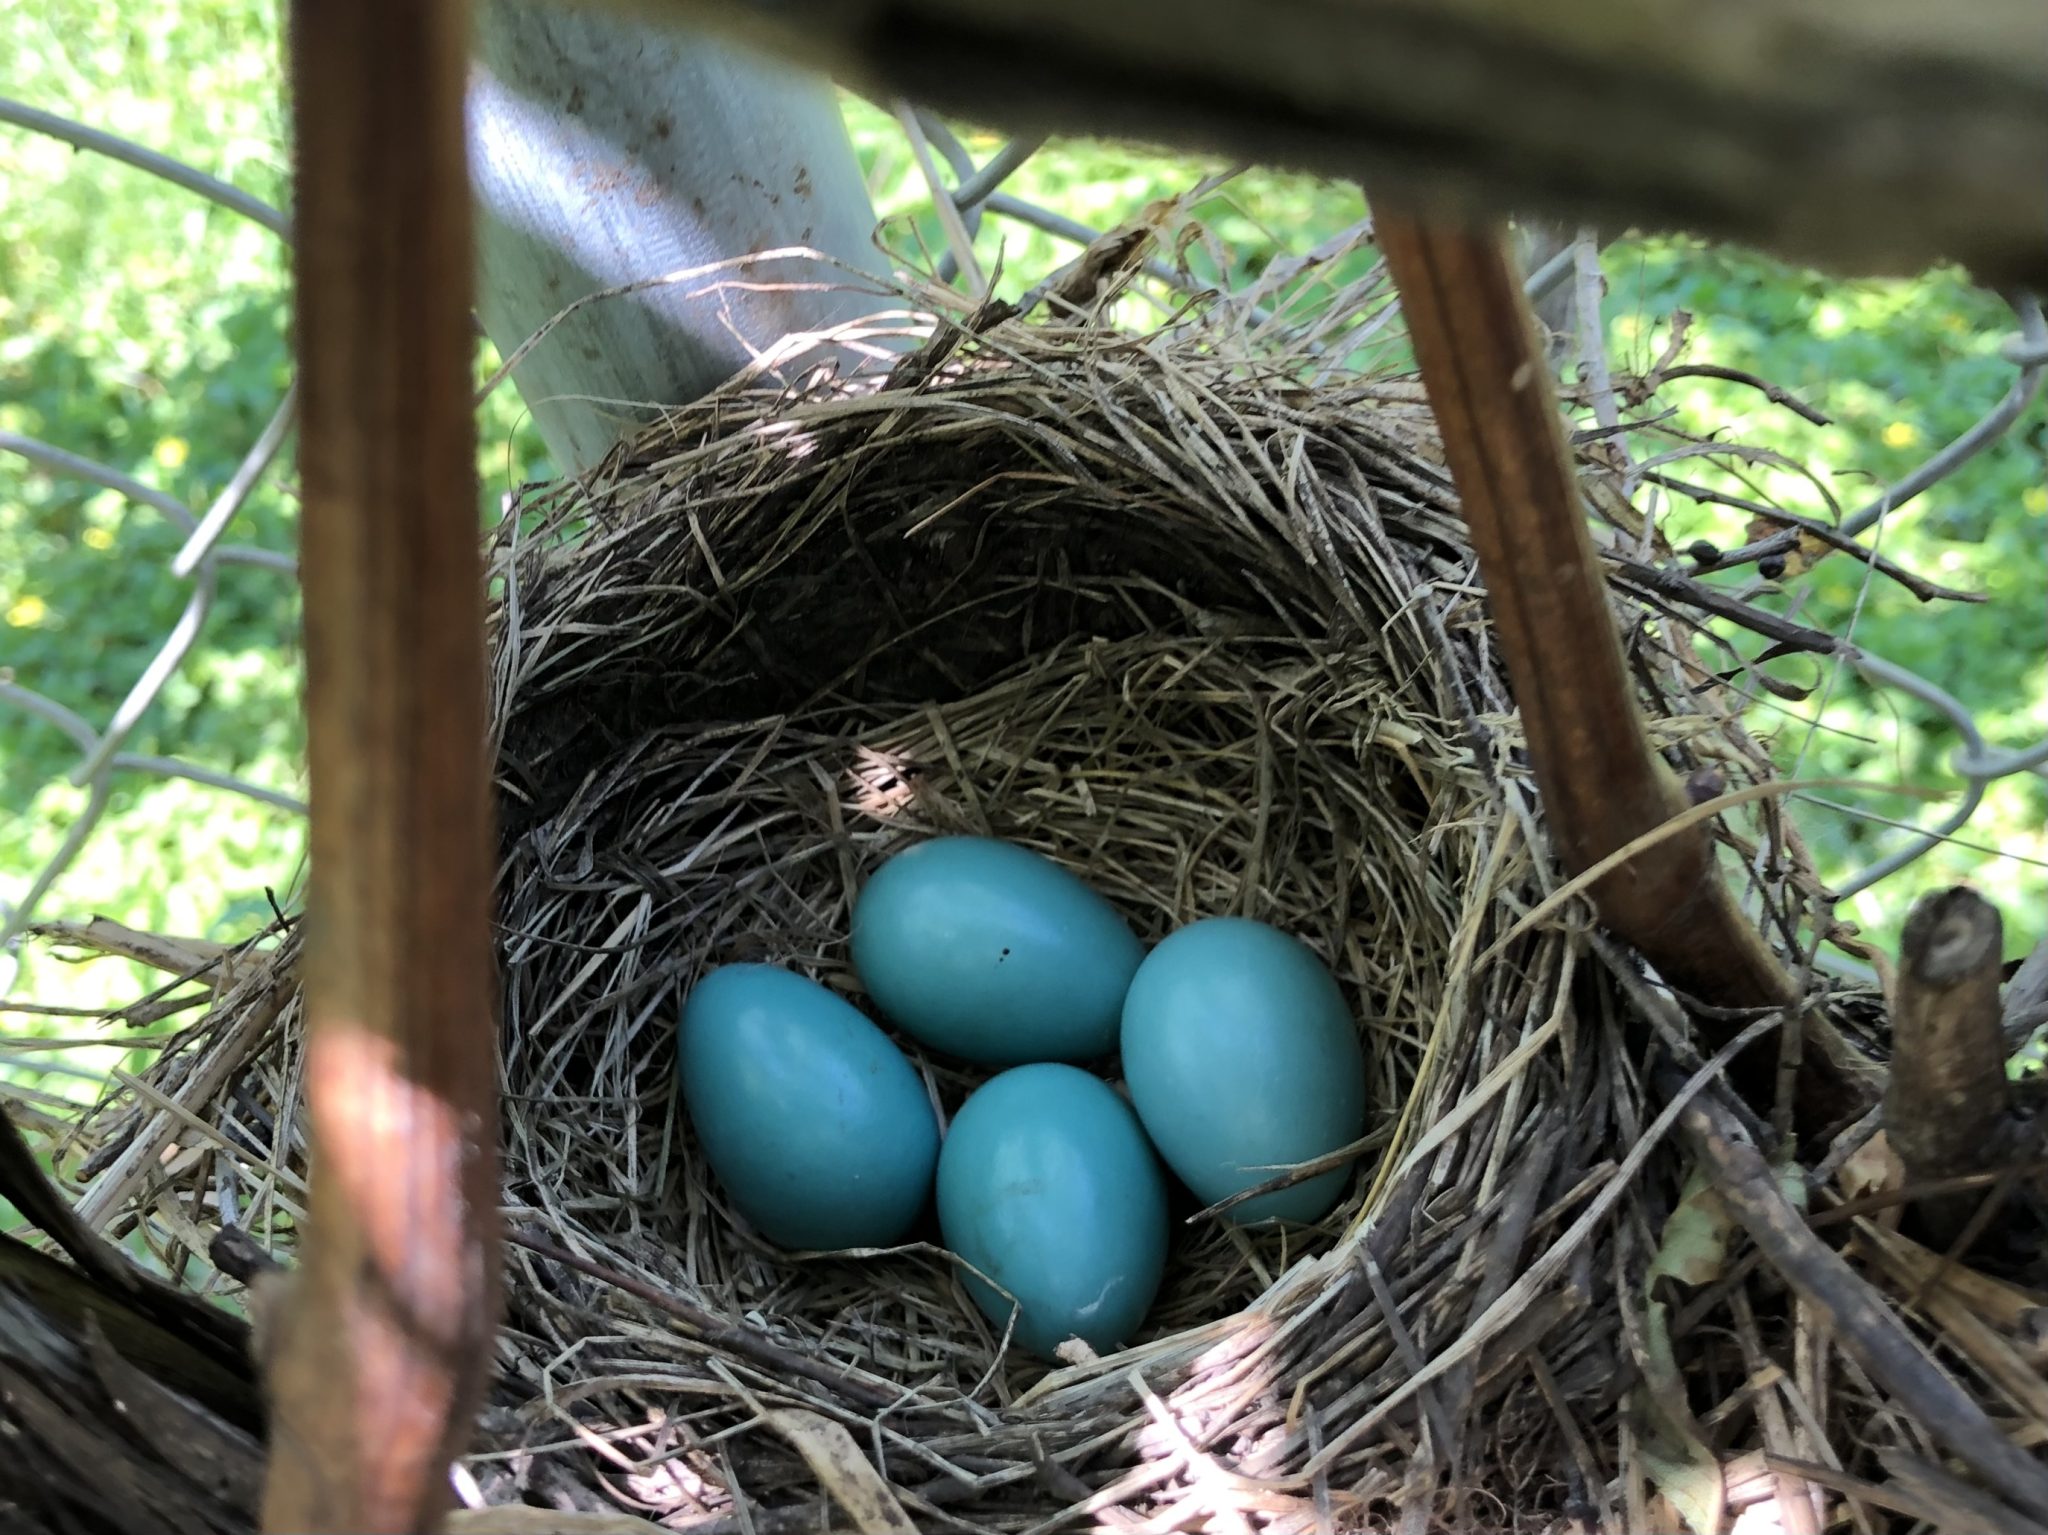 Robin's nest among the grape vines in Roscoe, IL – WorldPhotographyDay22